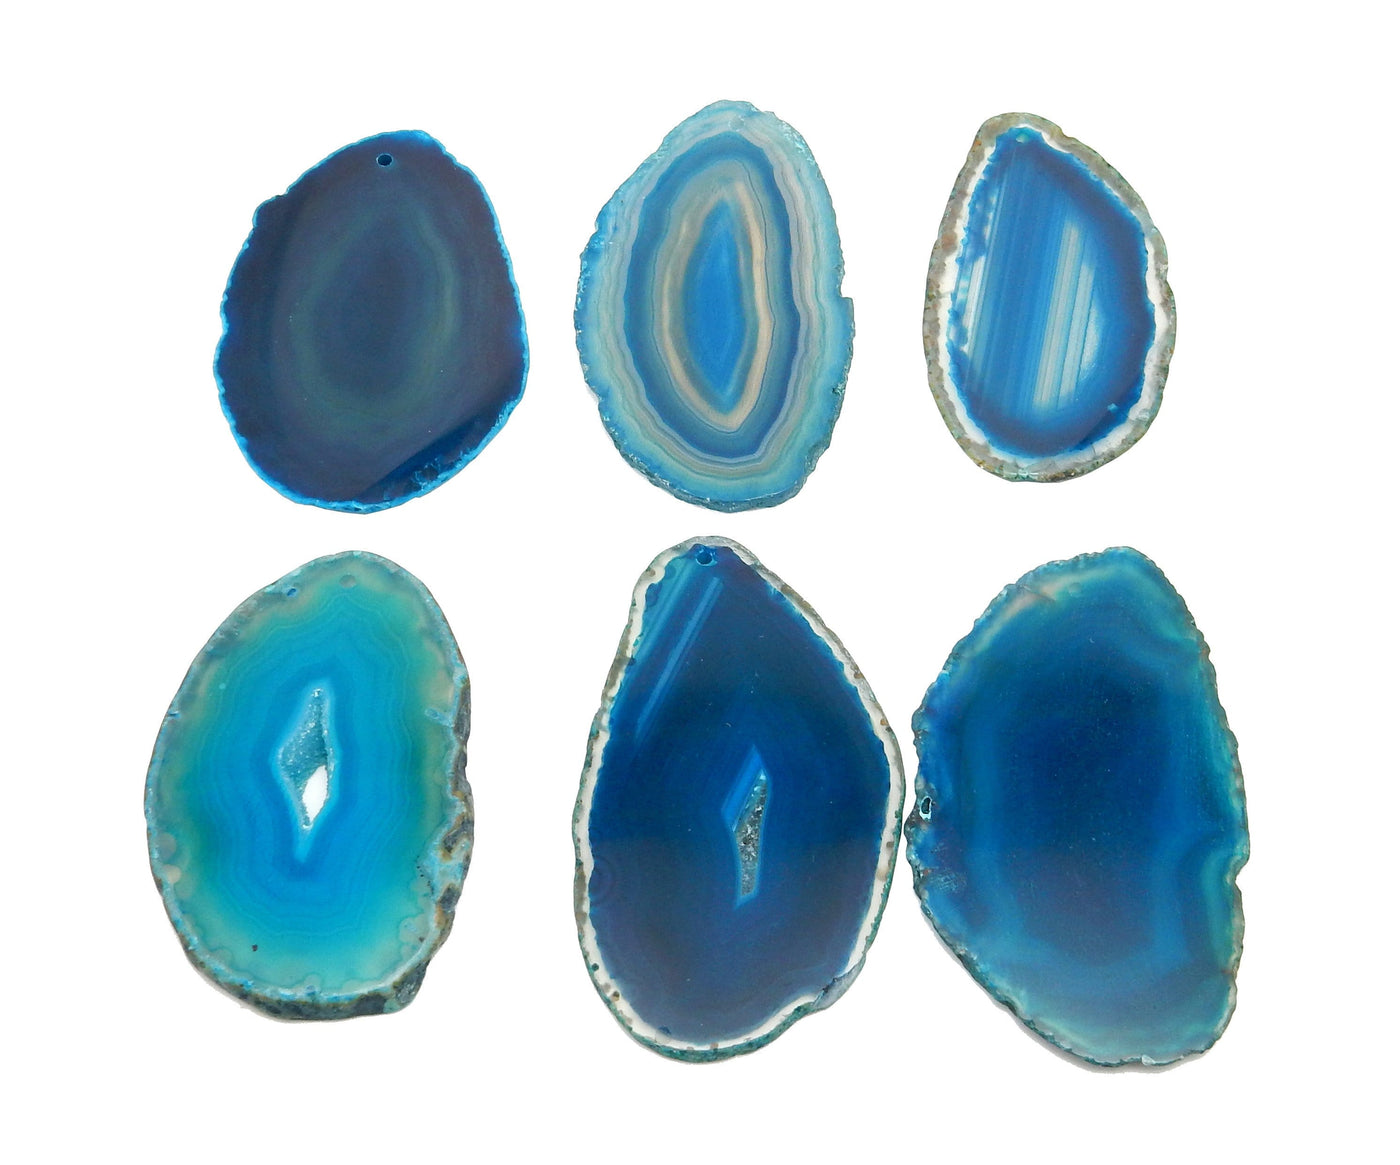 6 Teal Agate Slices Drilled on White Background.